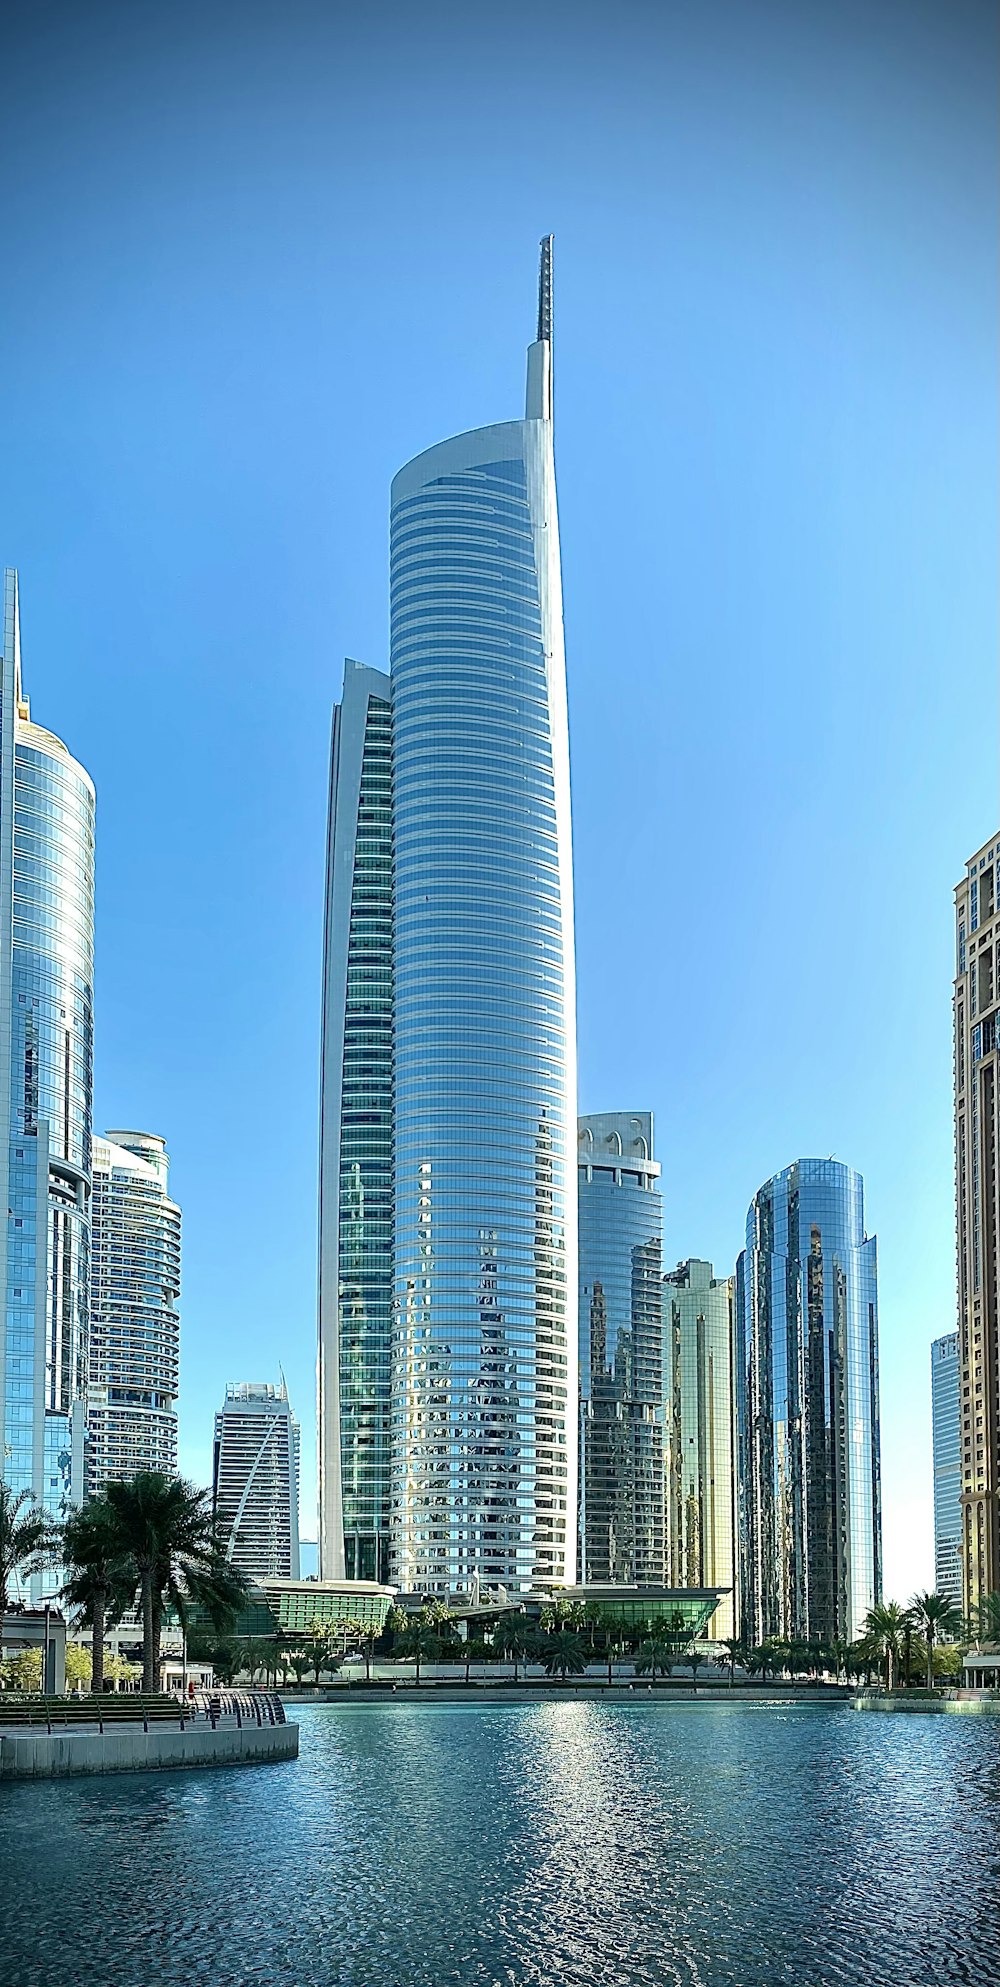 a body of water in front of tall buildings